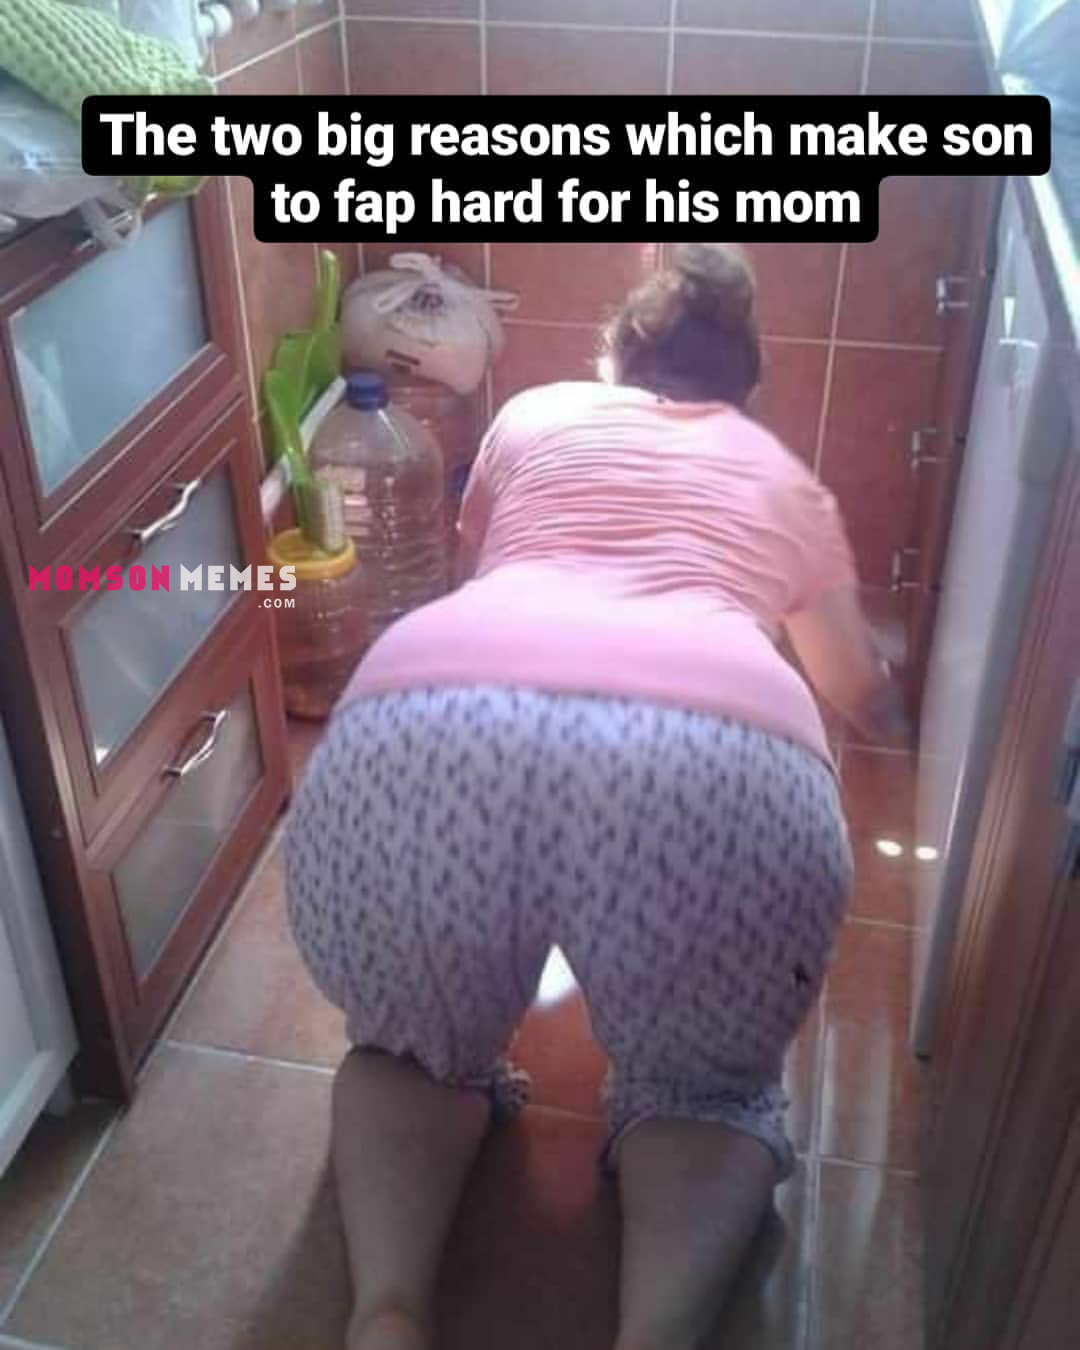 The reason which make son to fap hard for his mom!